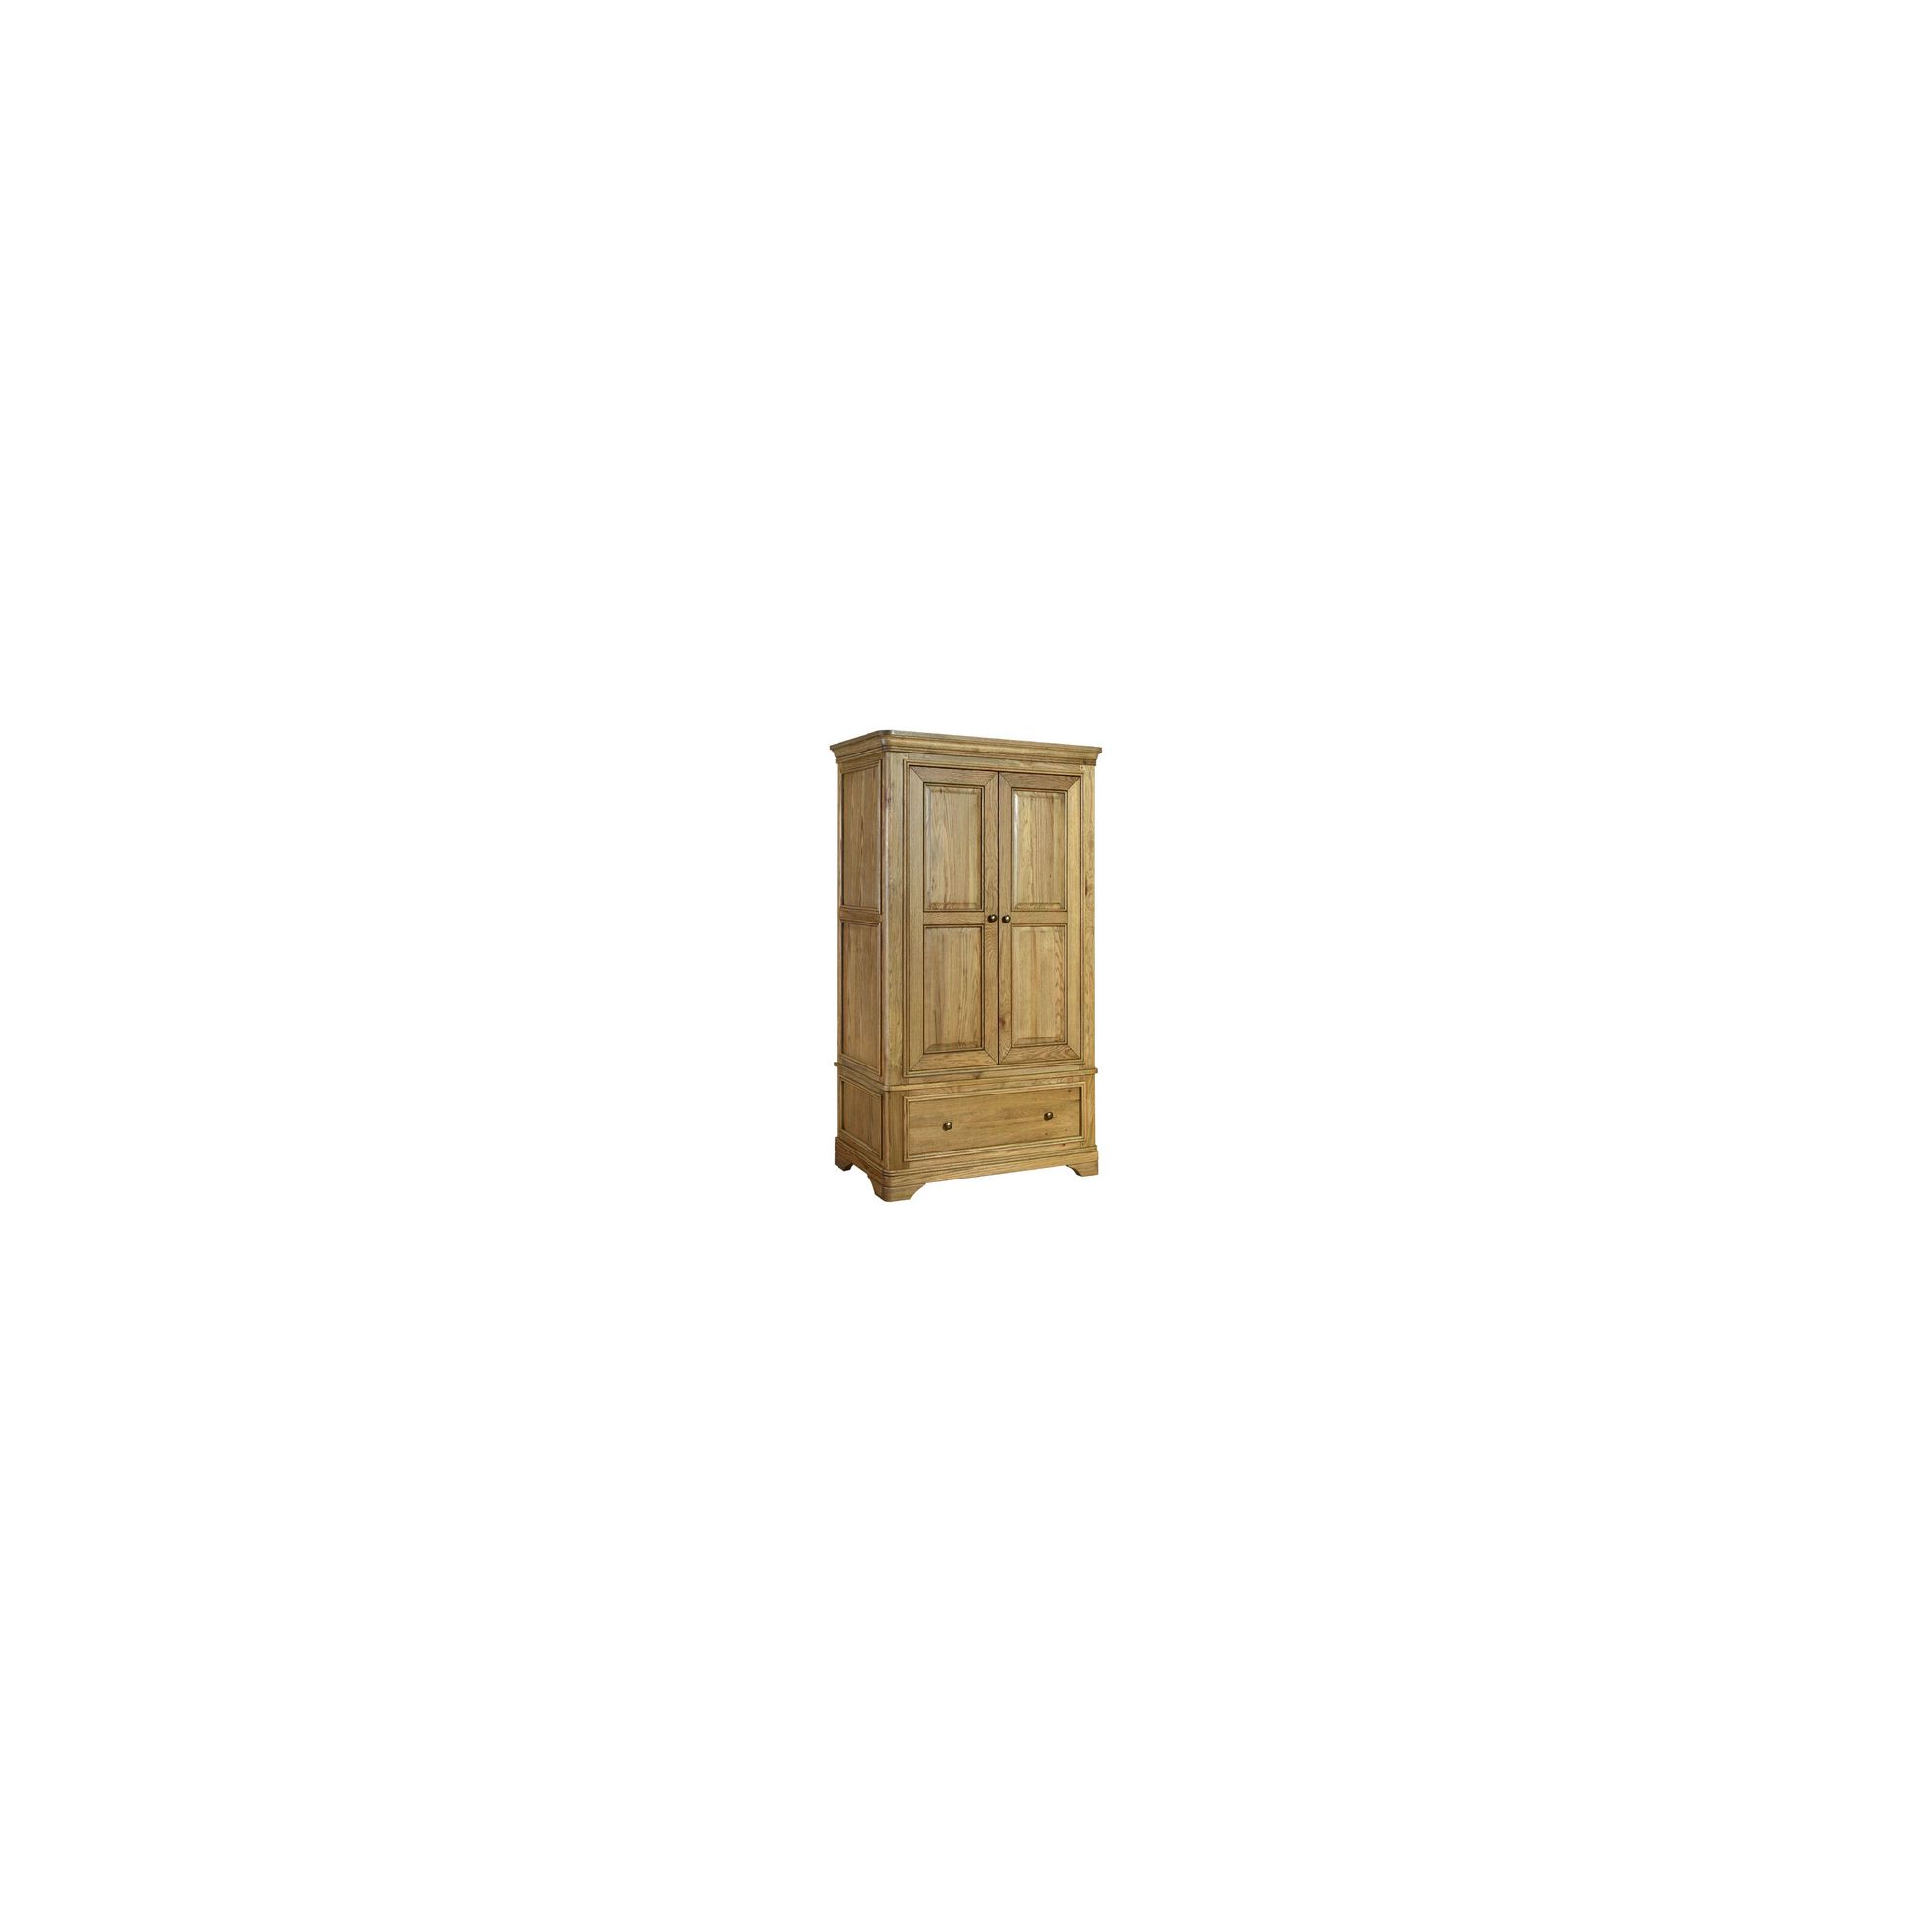 Kelburn Furniture Loire Gents Double Wardrobe with Drawer in Light Oak Stain and Satin Lacquer at Tesco Direct